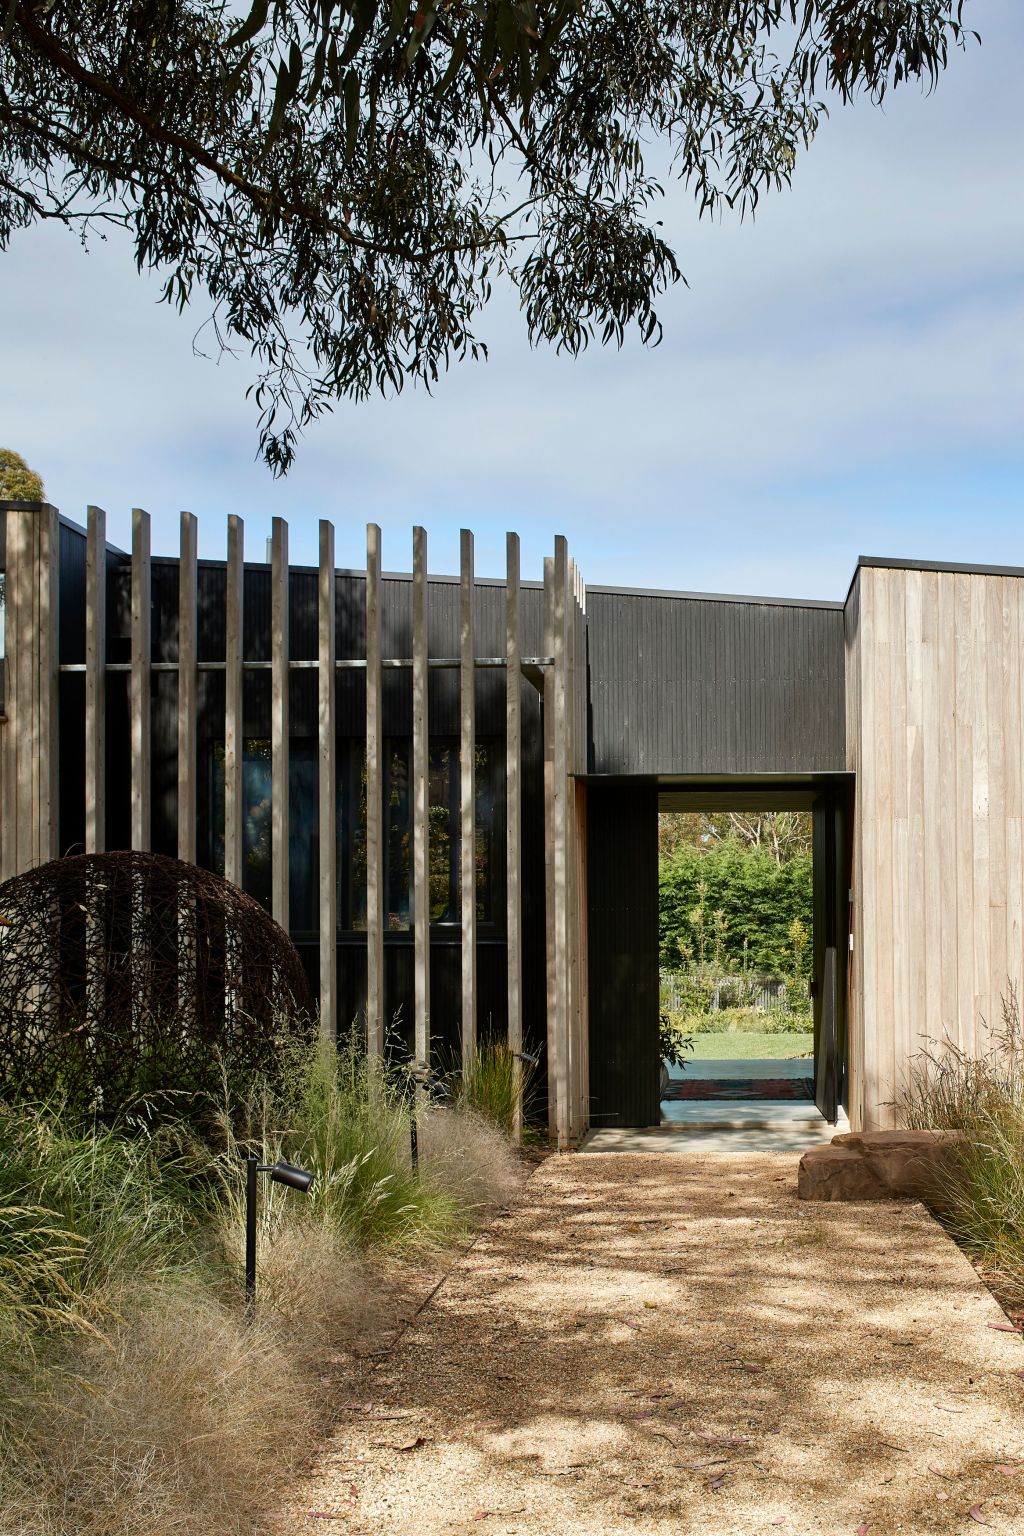 The entry is designated by darker stained wood. Photo: Shannon McGrath